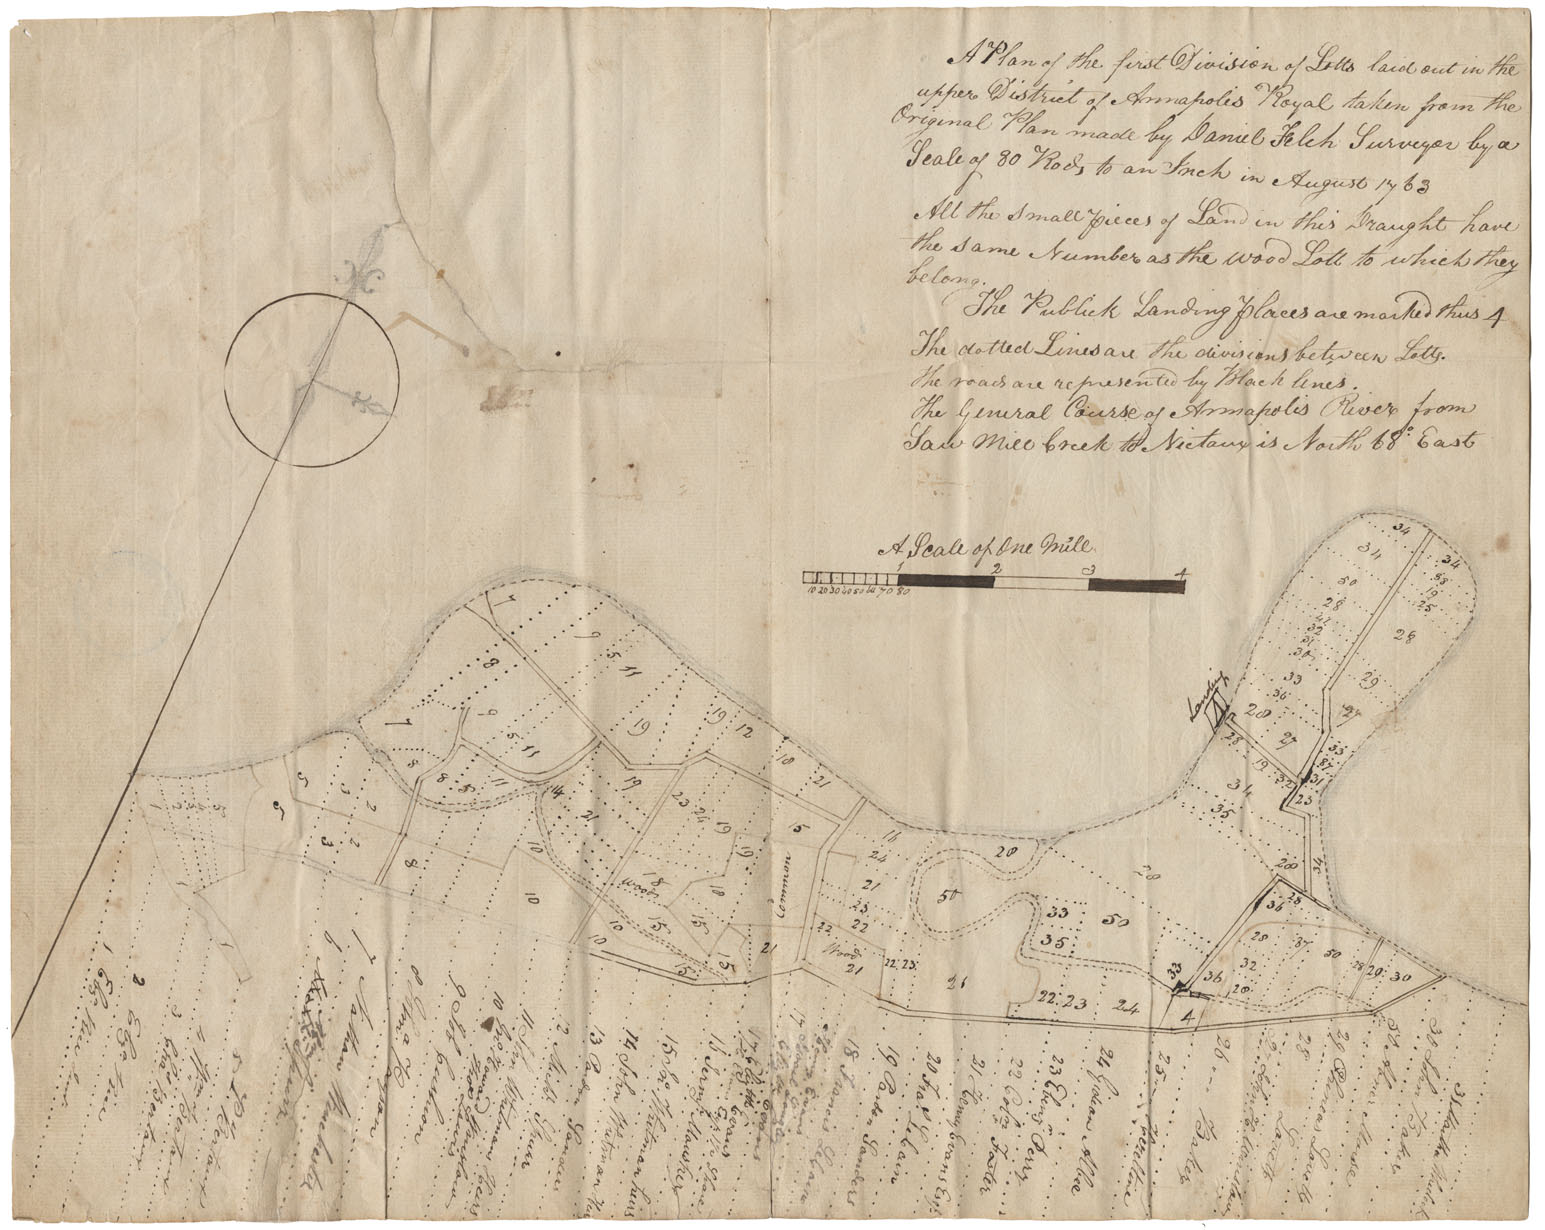 Plan of lots laid out by Daniel felch 1763 showing wood lots